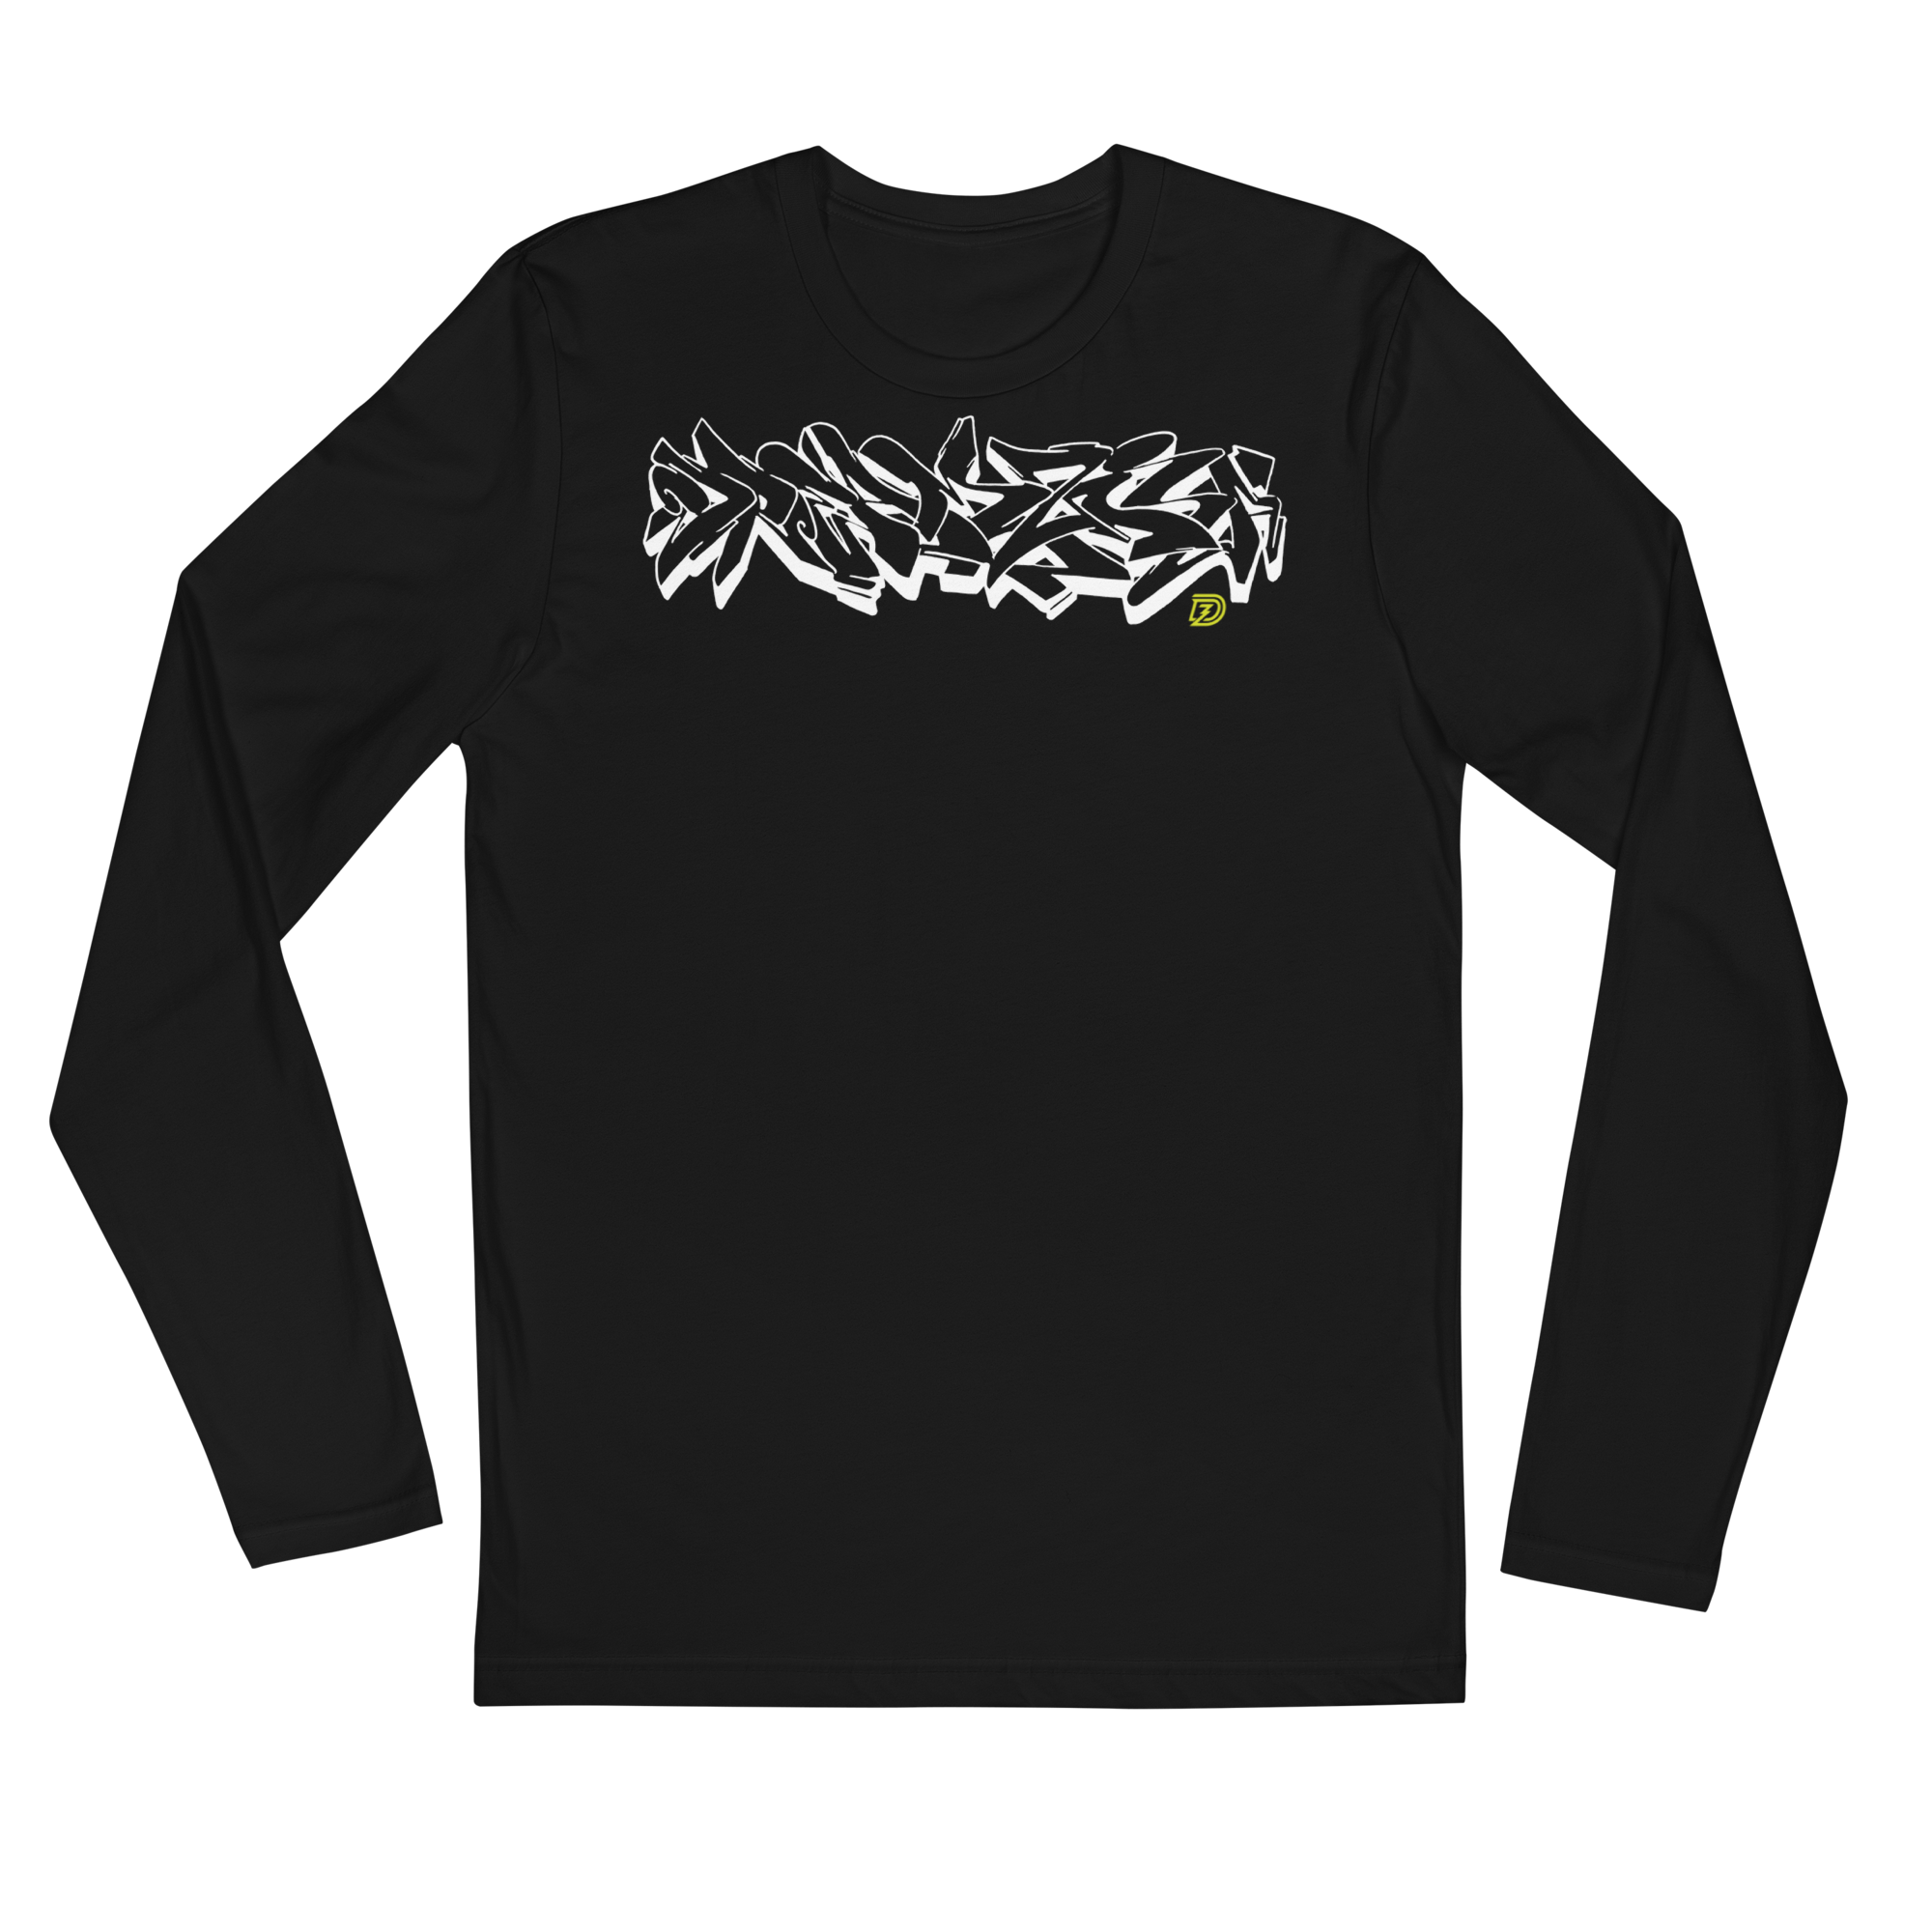 Graffiti Wildstyle 2 by Sanitor Long Sleeve Fitted Crew in Black